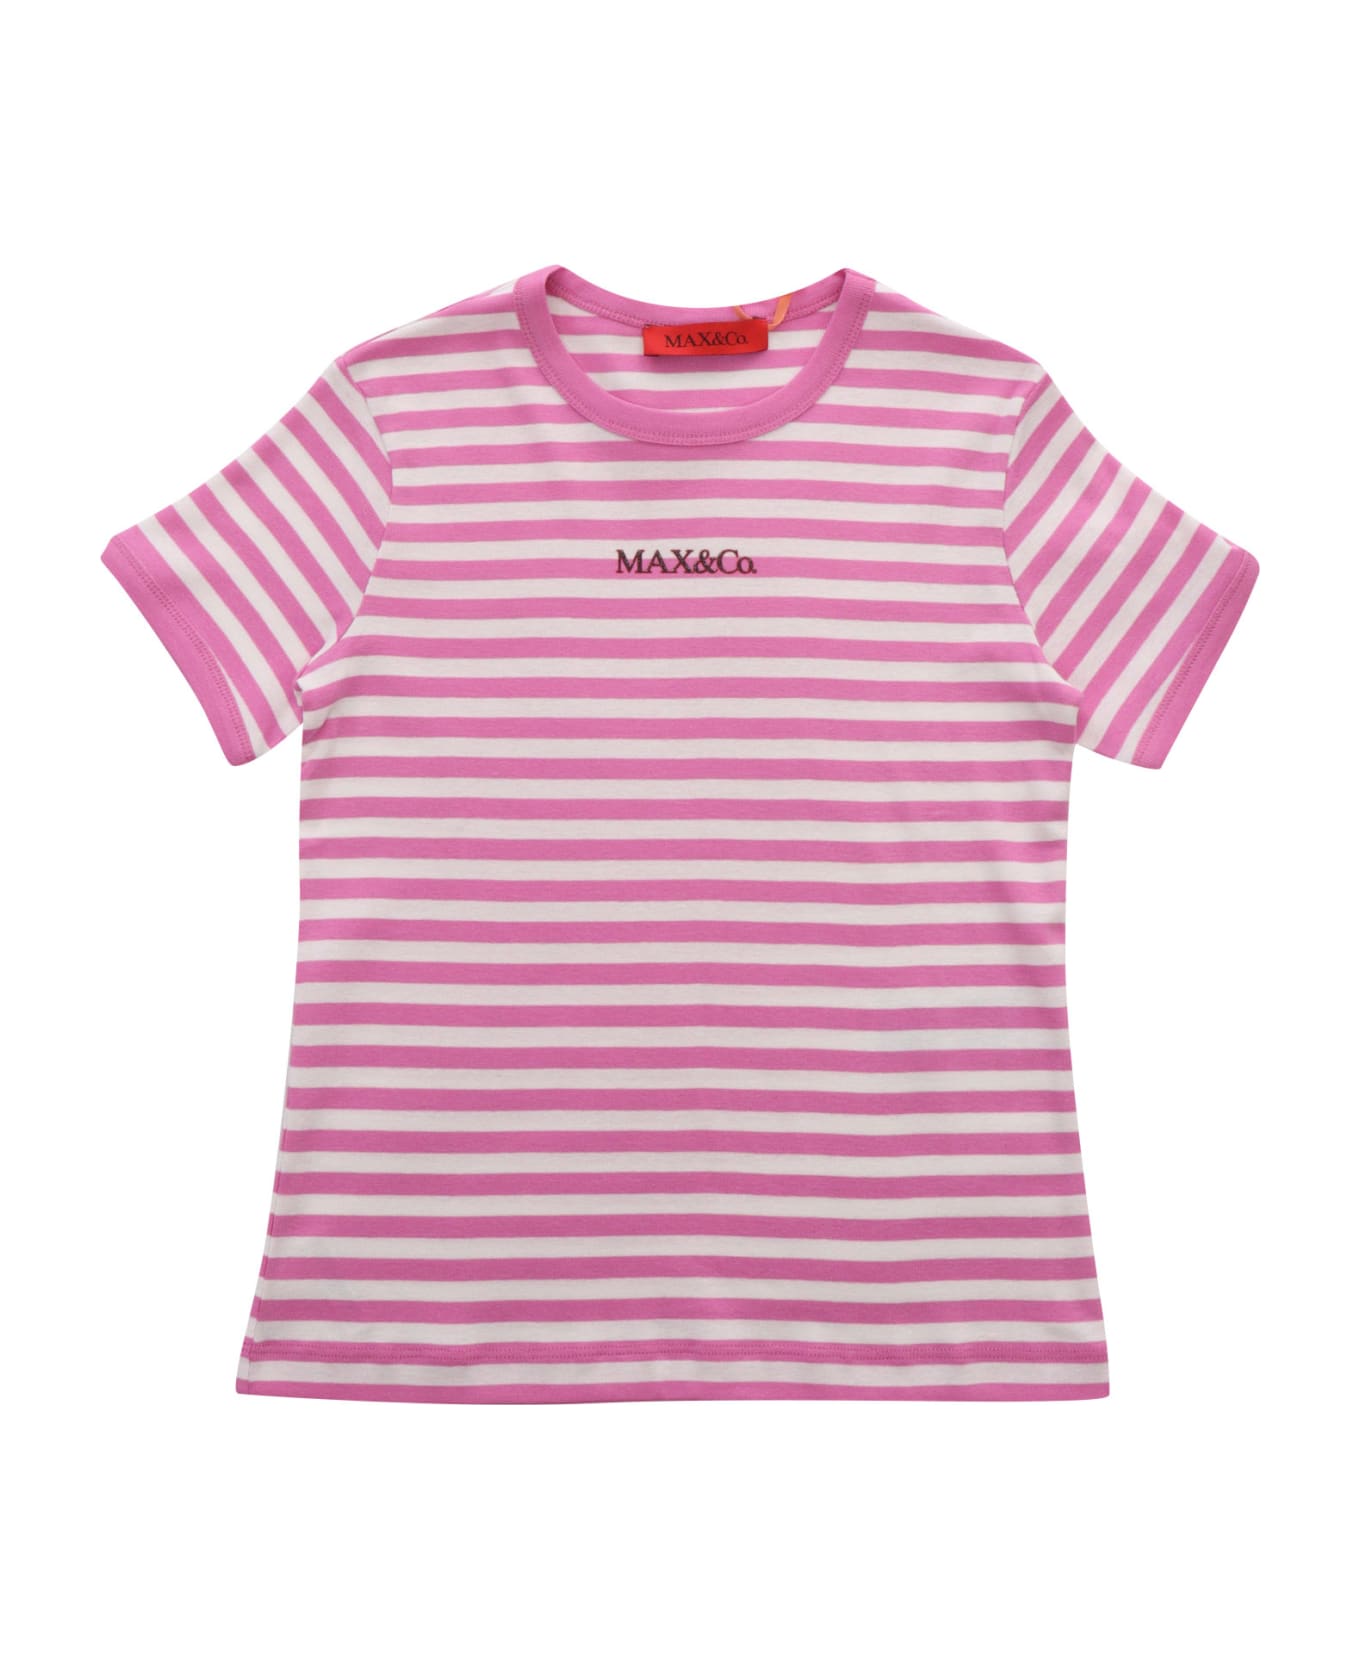 Max&Co. Pink Striped T-shirt - PINK